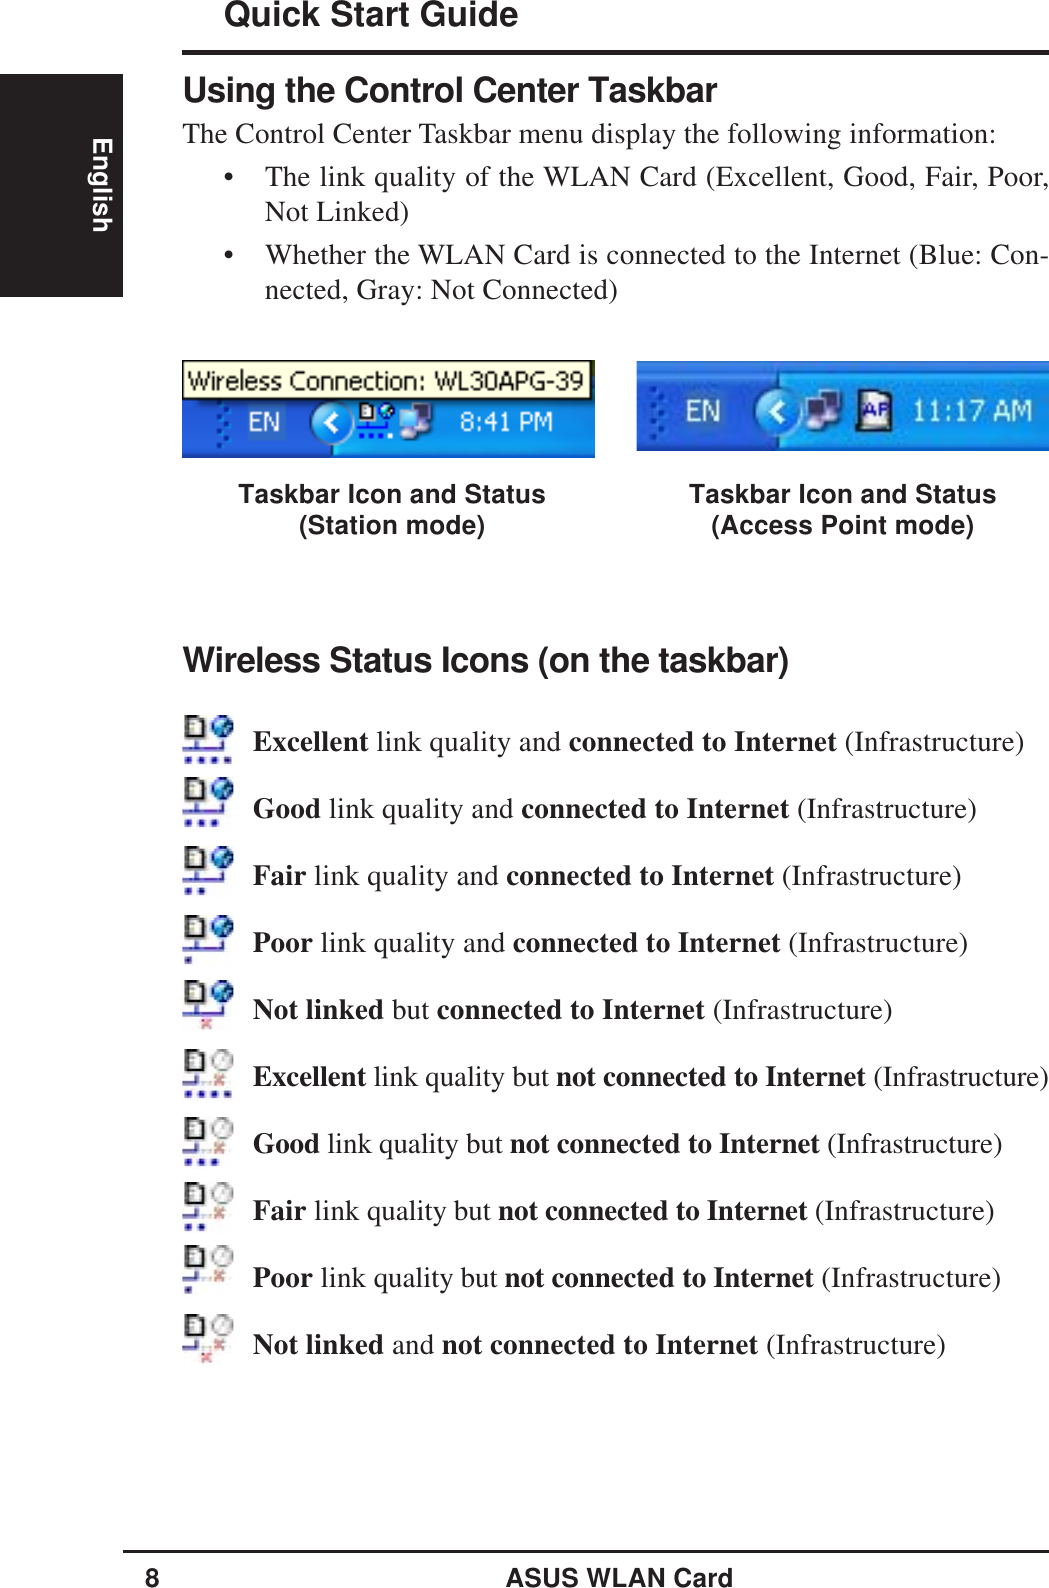 8ASUS WLAN CardQuick Start GuideEnglishWireless Status Icons (on the taskbar)Excellent link quality and connected to Internet (Infrastructure)Good link quality and connected to Internet (Infrastructure)Fair link quality and connected to Internet (Infrastructure)Poor link quality and connected to Internet (Infrastructure)Not linked but connected to Internet (Infrastructure)Excellent link quality but not connected to Internet (Infrastructure)Good link quality but not connected to Internet (Infrastructure)Fair link quality but not connected to Internet (Infrastructure)Poor link quality but not connected to Internet (Infrastructure)Not linked and not connected to Internet (Infrastructure)Using the Control Center TaskbarThe Control Center Taskbar menu display the following information:• The link quality of the WLAN Card (Excellent, Good, Fair, Poor,Not Linked)• Whether the WLAN Card is connected to the Internet (Blue: Con-nected, Gray: Not Connected)Taskbar Icon and Status(Station mode) Taskbar Icon and Status(Access Point mode)